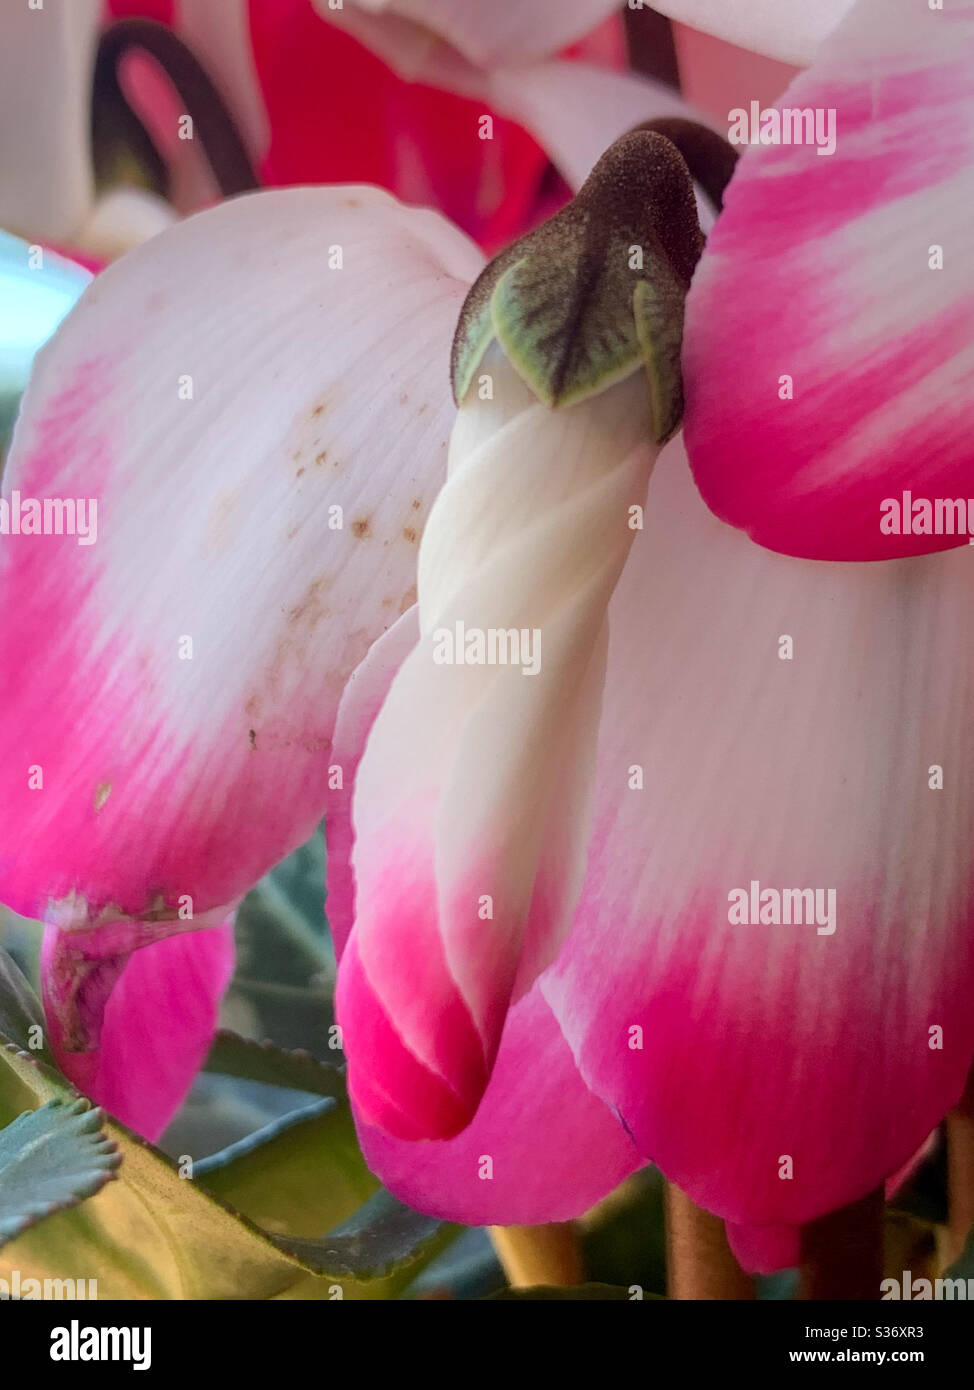 Hot pink and white Cyclamen petals still curving wrapping firmly around a bud in a spiral Stock Photo